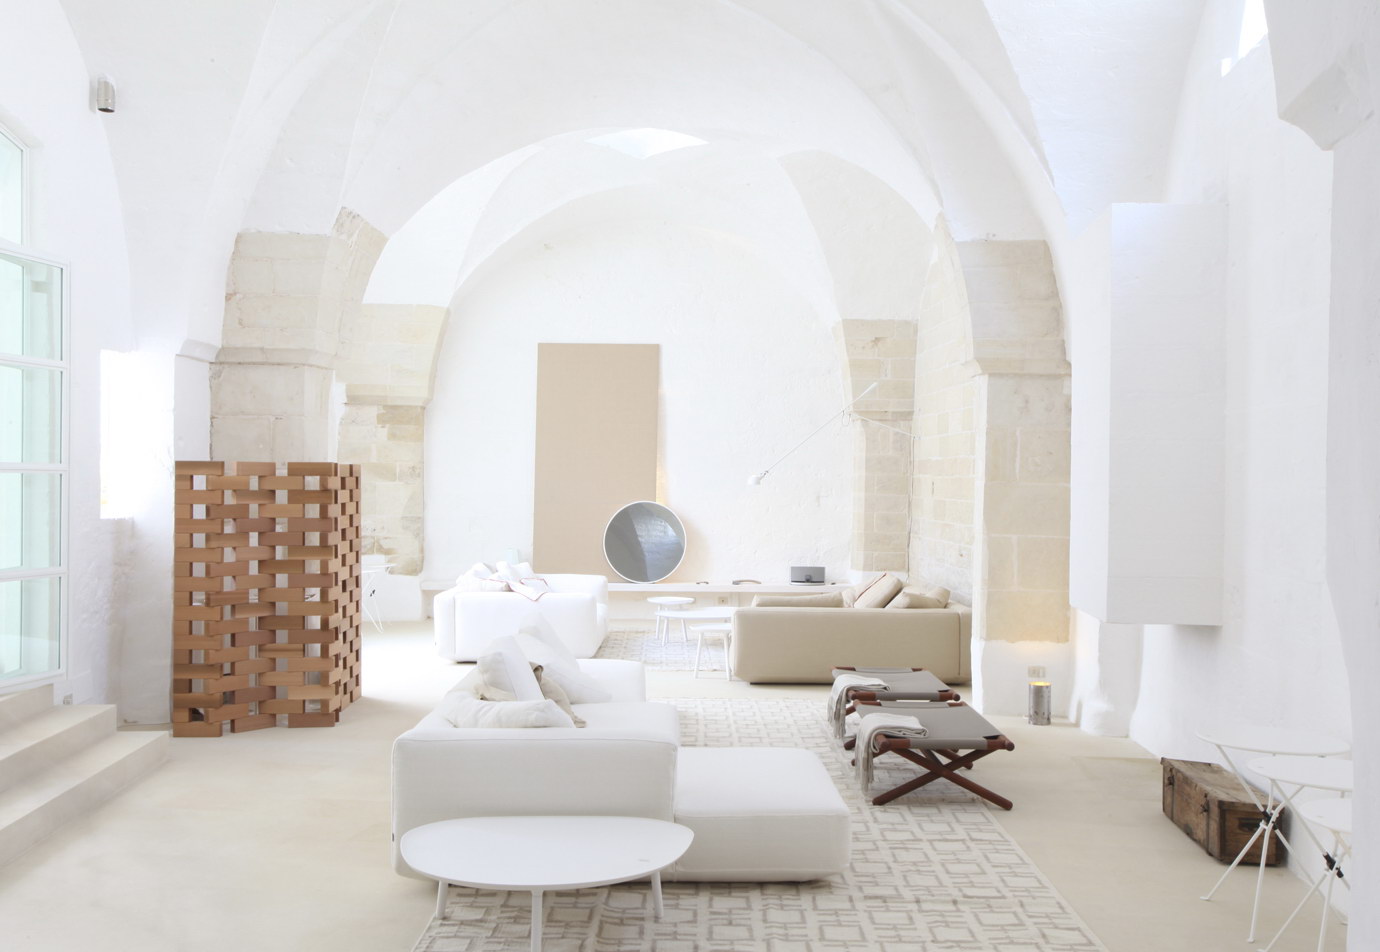 Renovation of an ex Oil Mill by Ludovica + Roberto Palomba